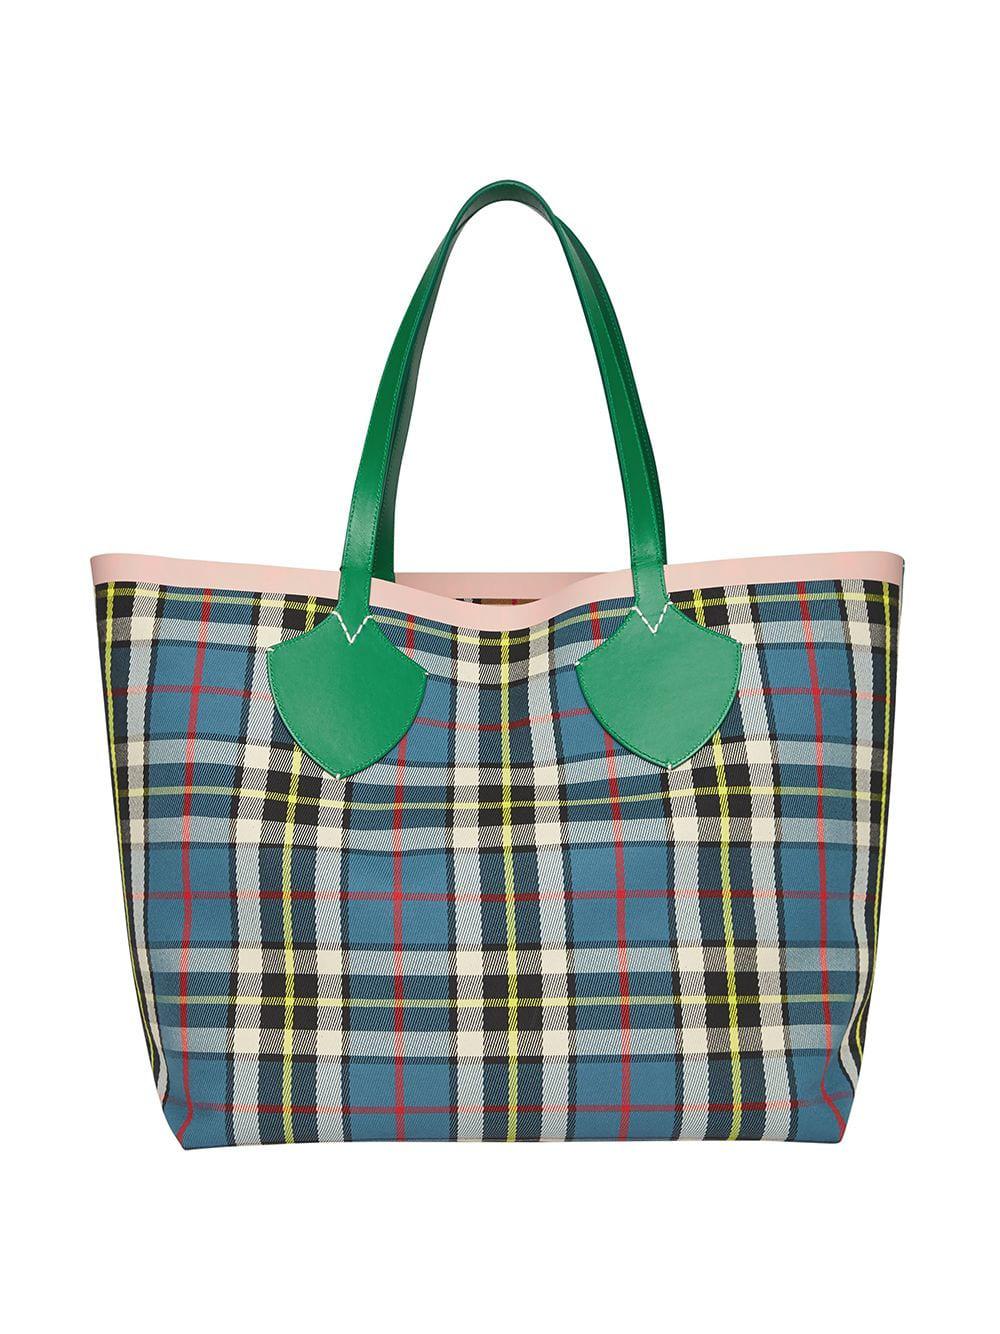 Burberry Cotton The Giant Reversible Tote In Vintage Check in Green - Lyst